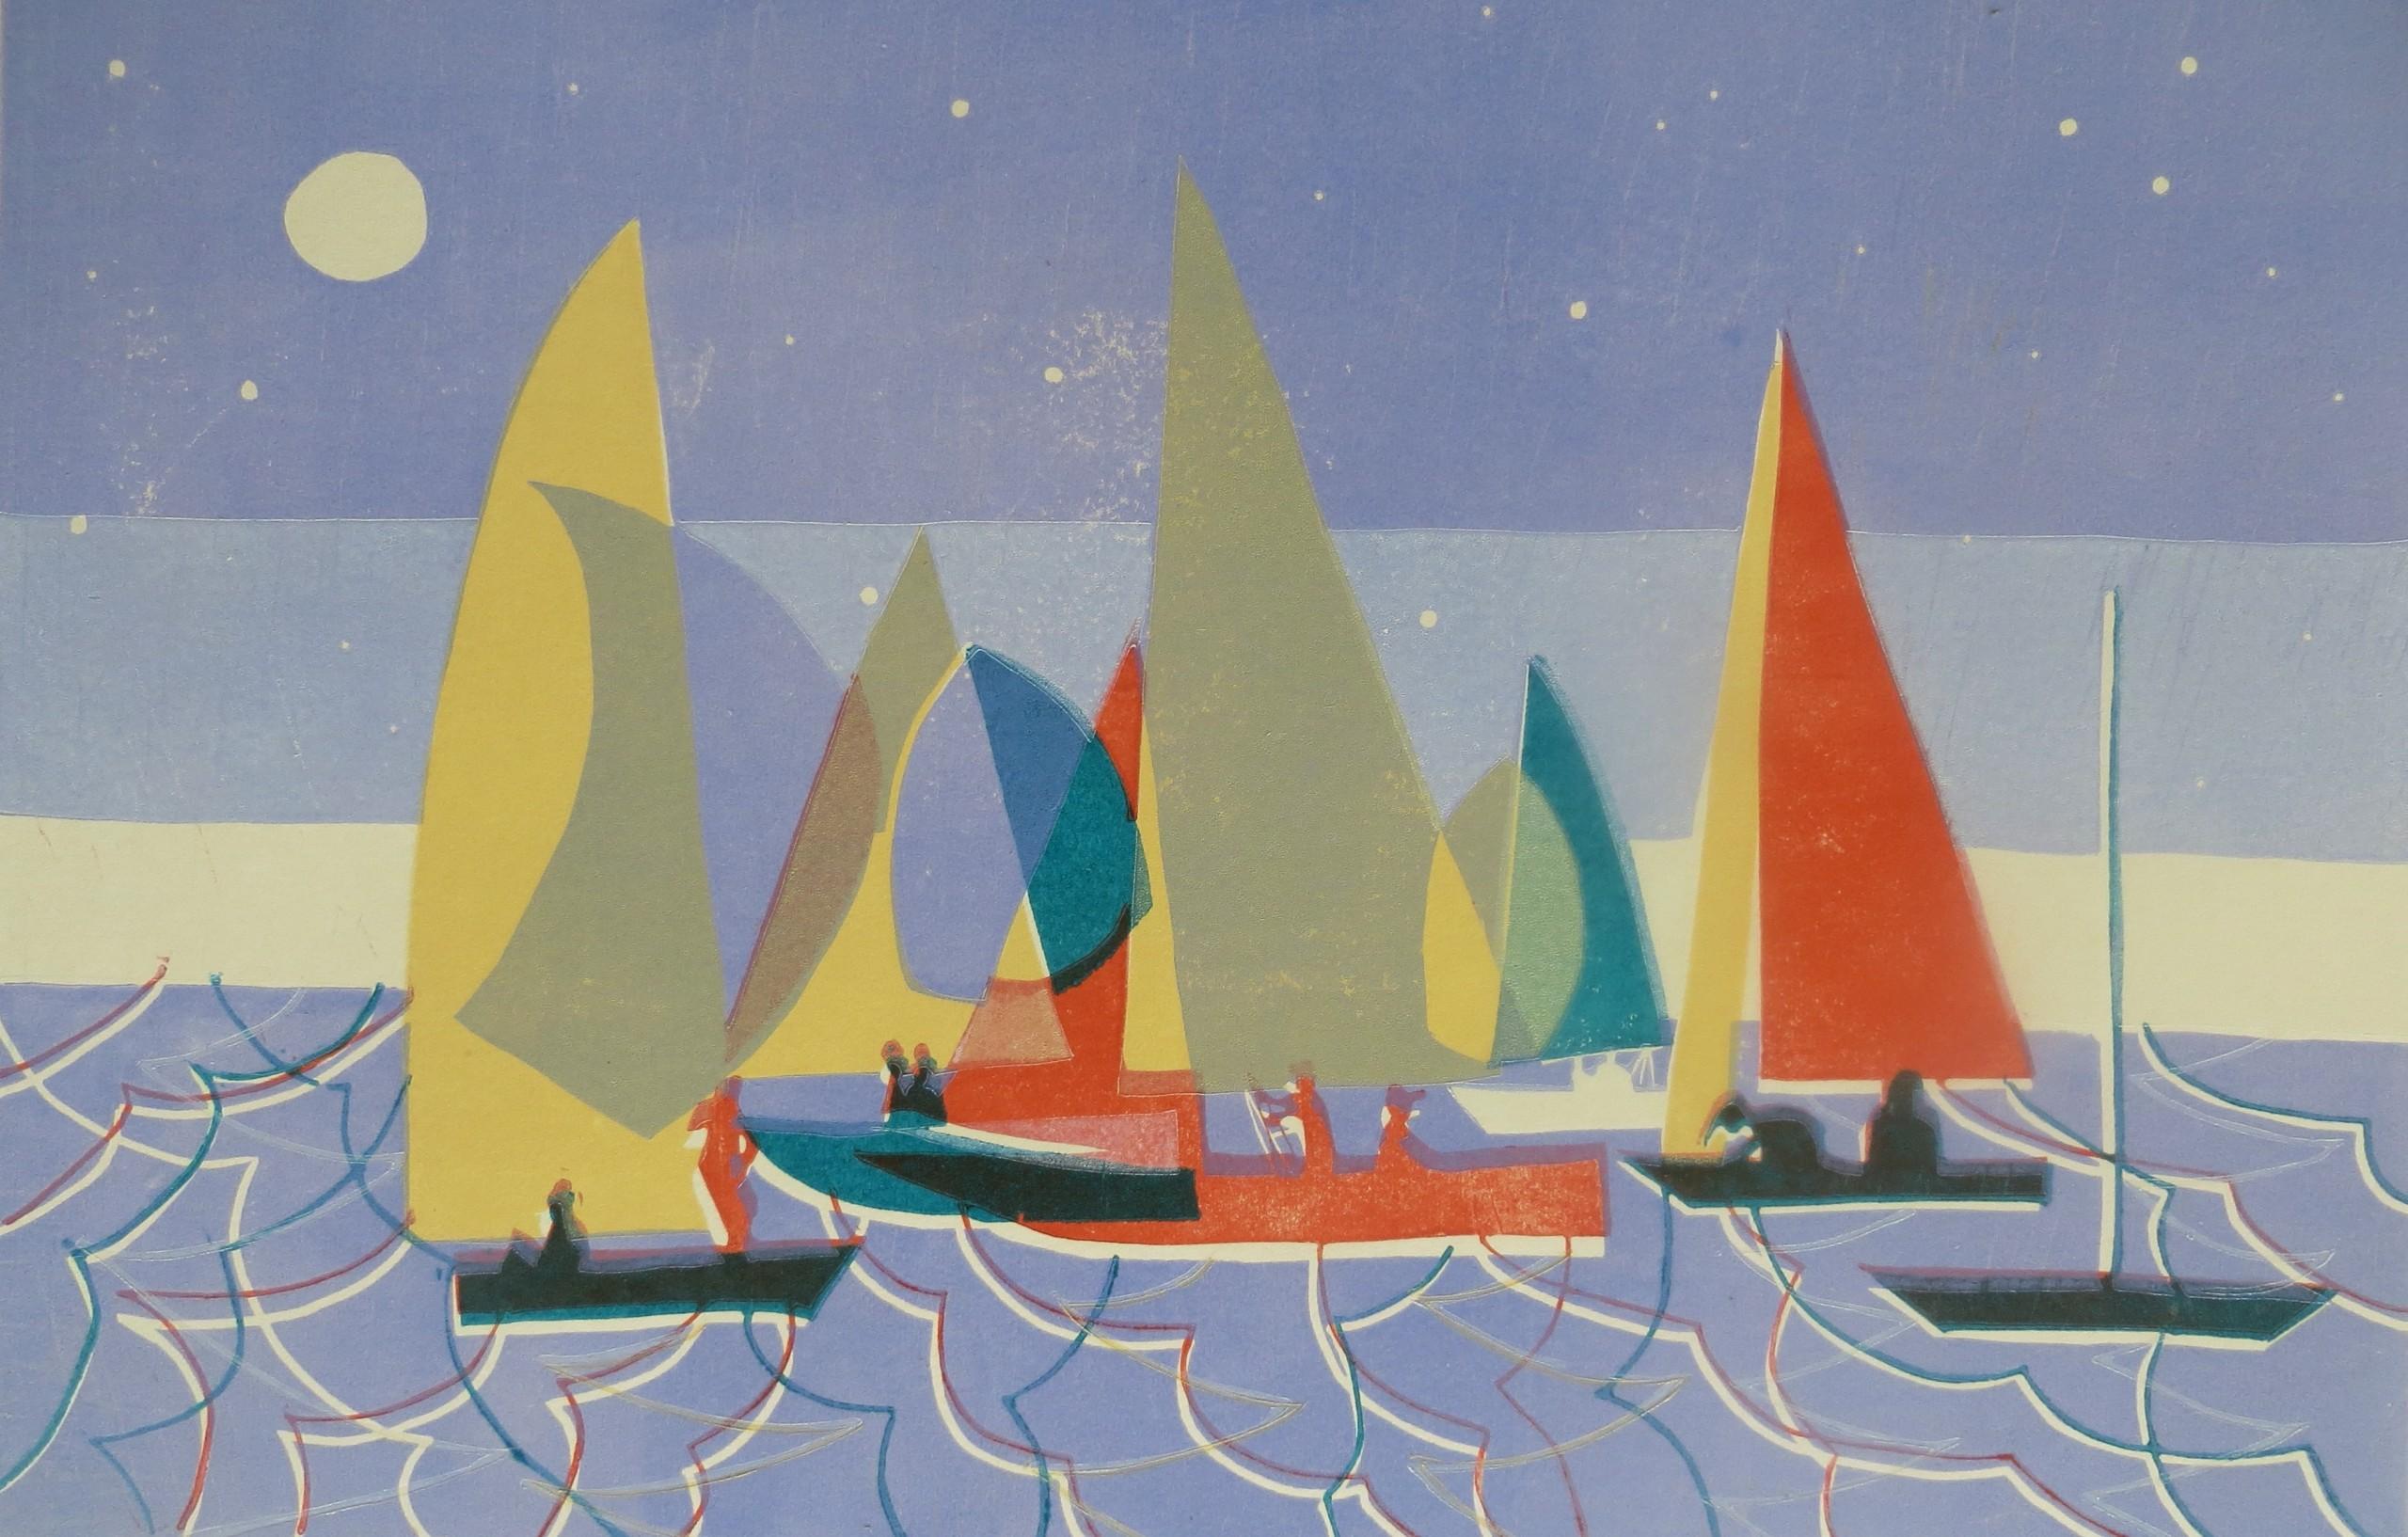 Memories of Padstow and Sailing at Dusk diptych - Contemporary Print by Lisa Takahashi